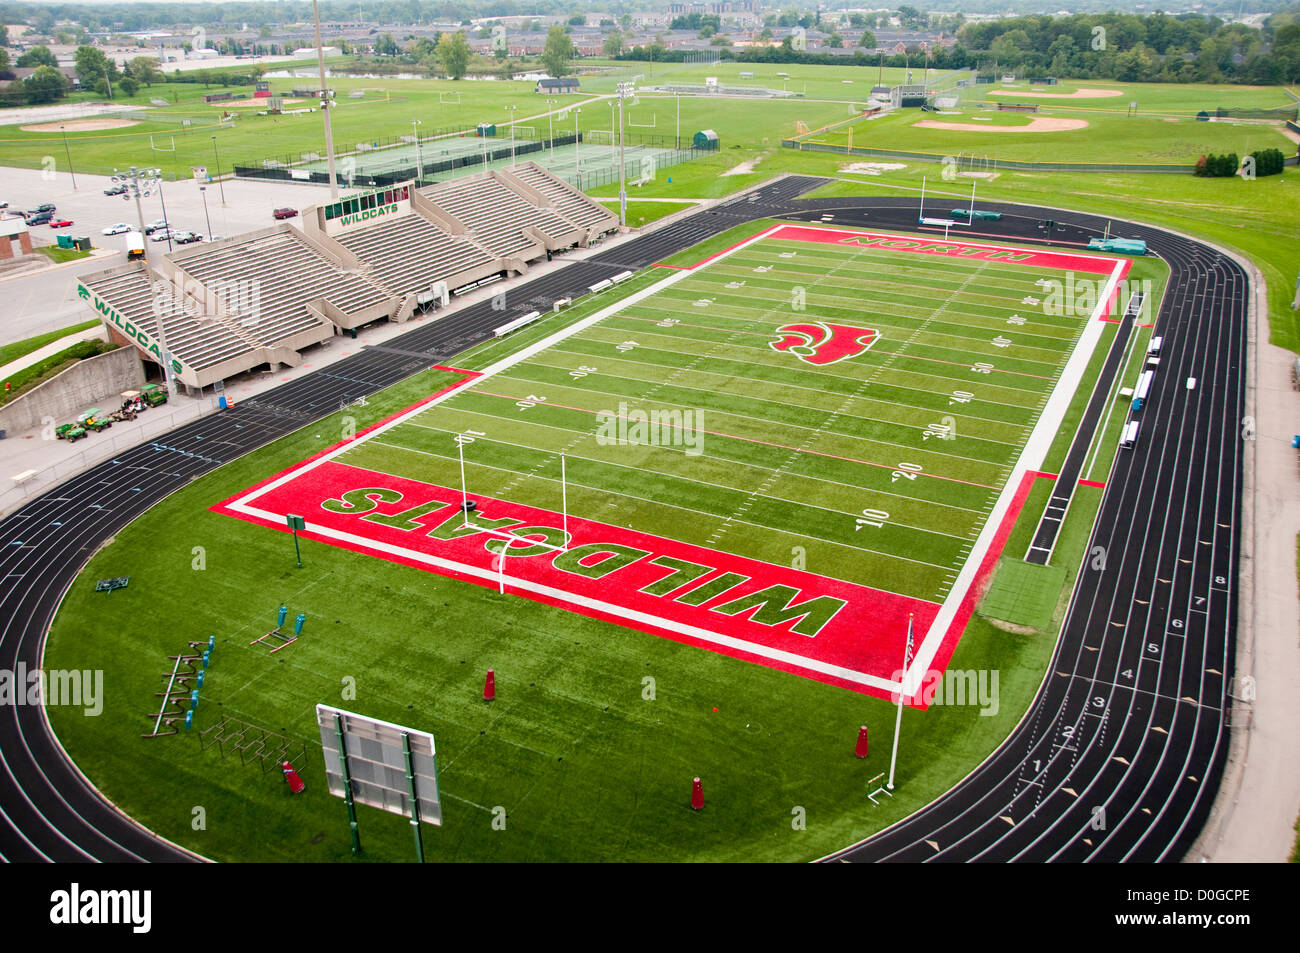 USA, Indiana, Indianapolis high school athletic field for football and